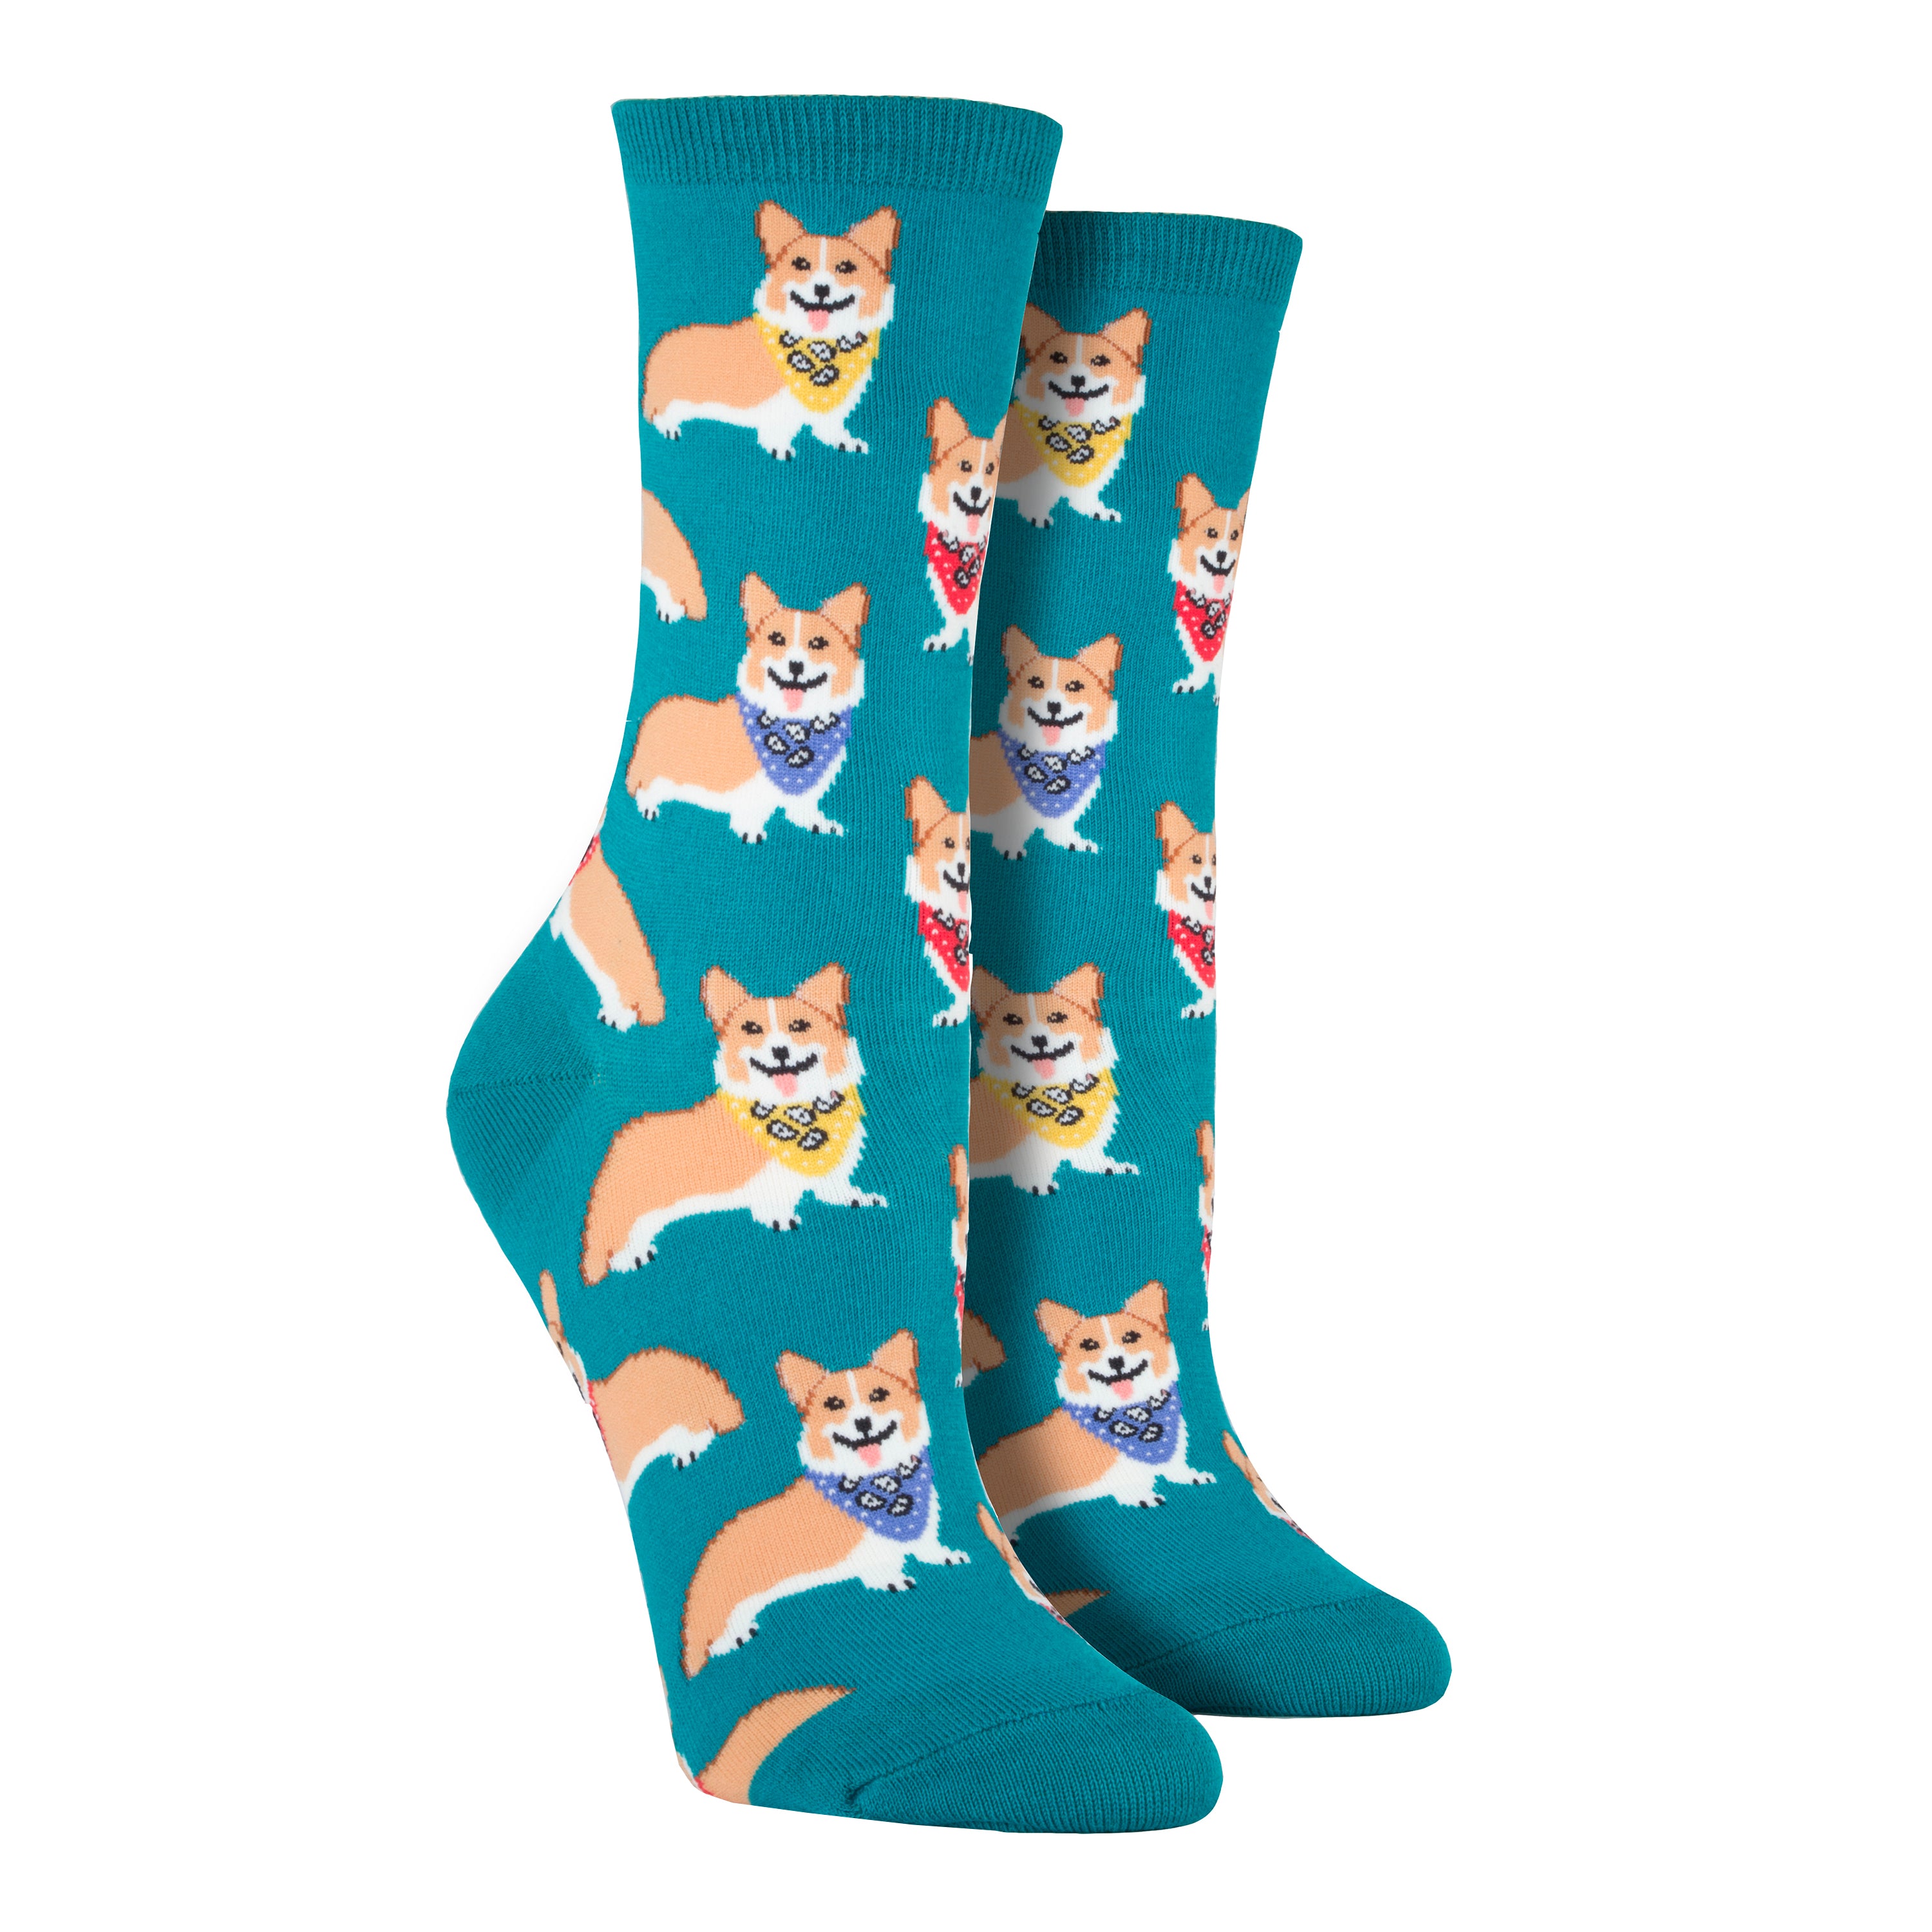 Shown on leg forms, a pair of Sock Smith brand women's cotton crew socks in emerald green featuring an all over motif of blonde corgis in blue, red, and green bandanas.